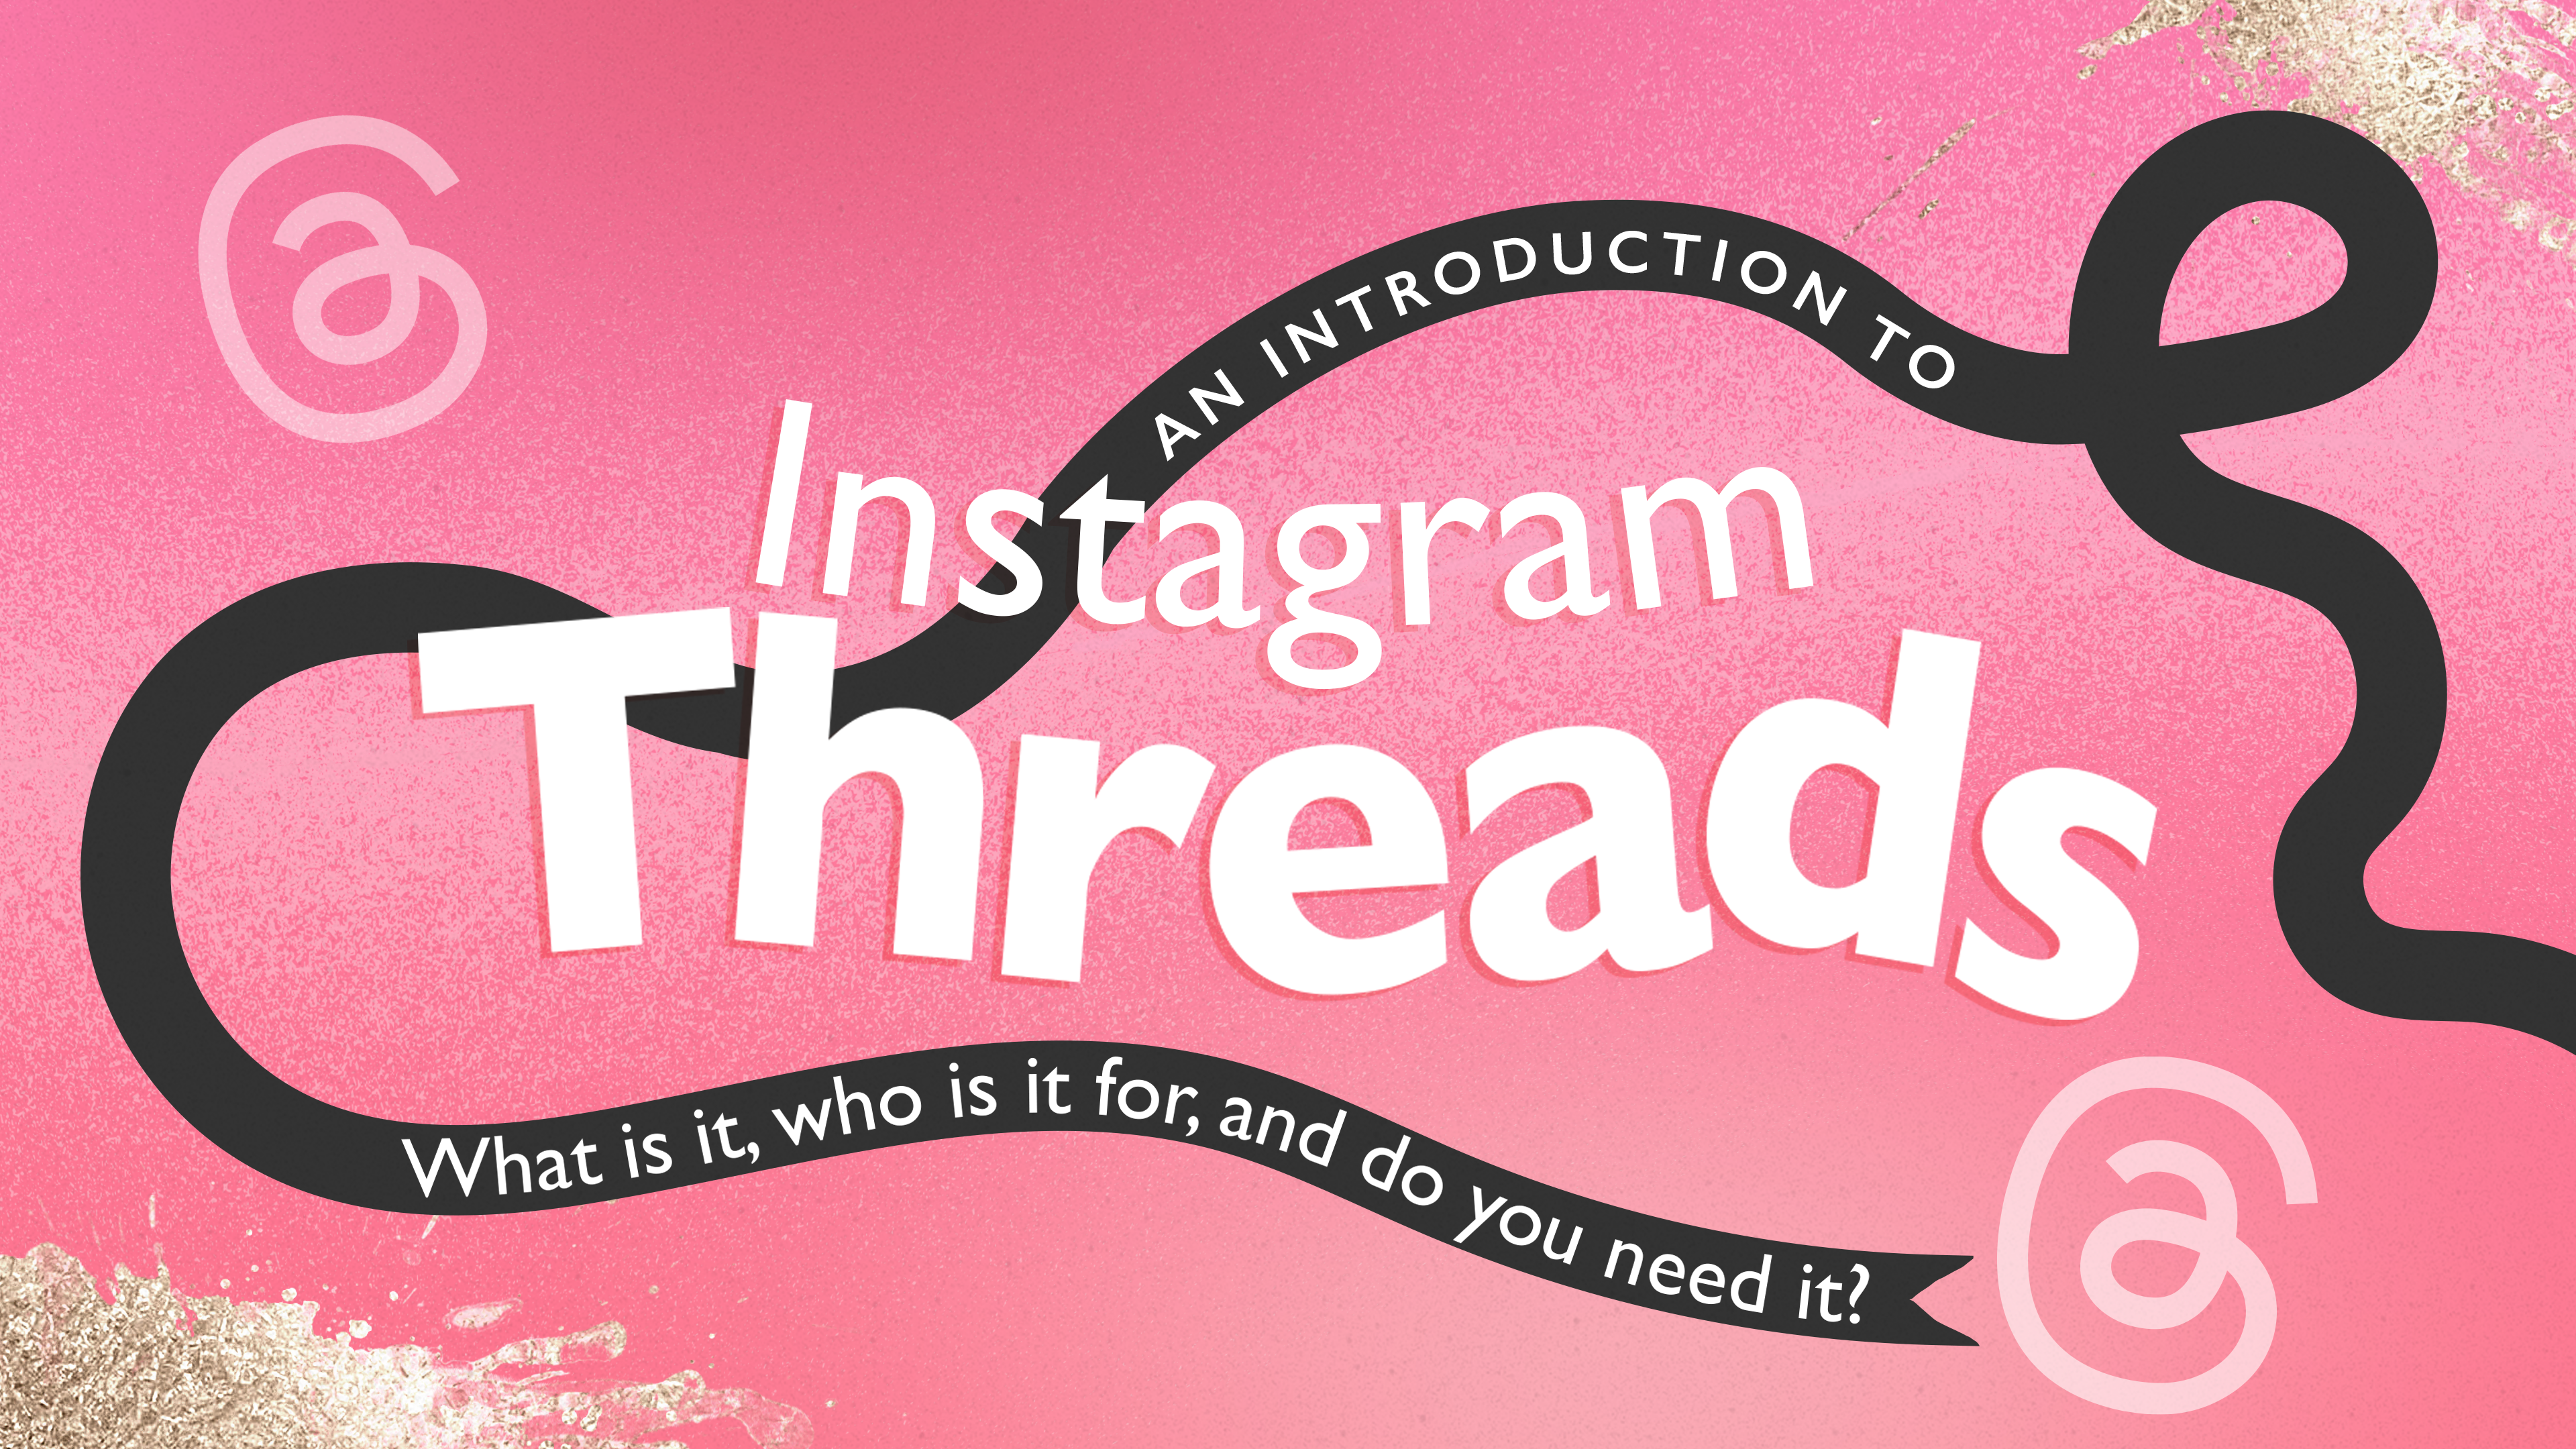 An Introduction to Instagram Threads